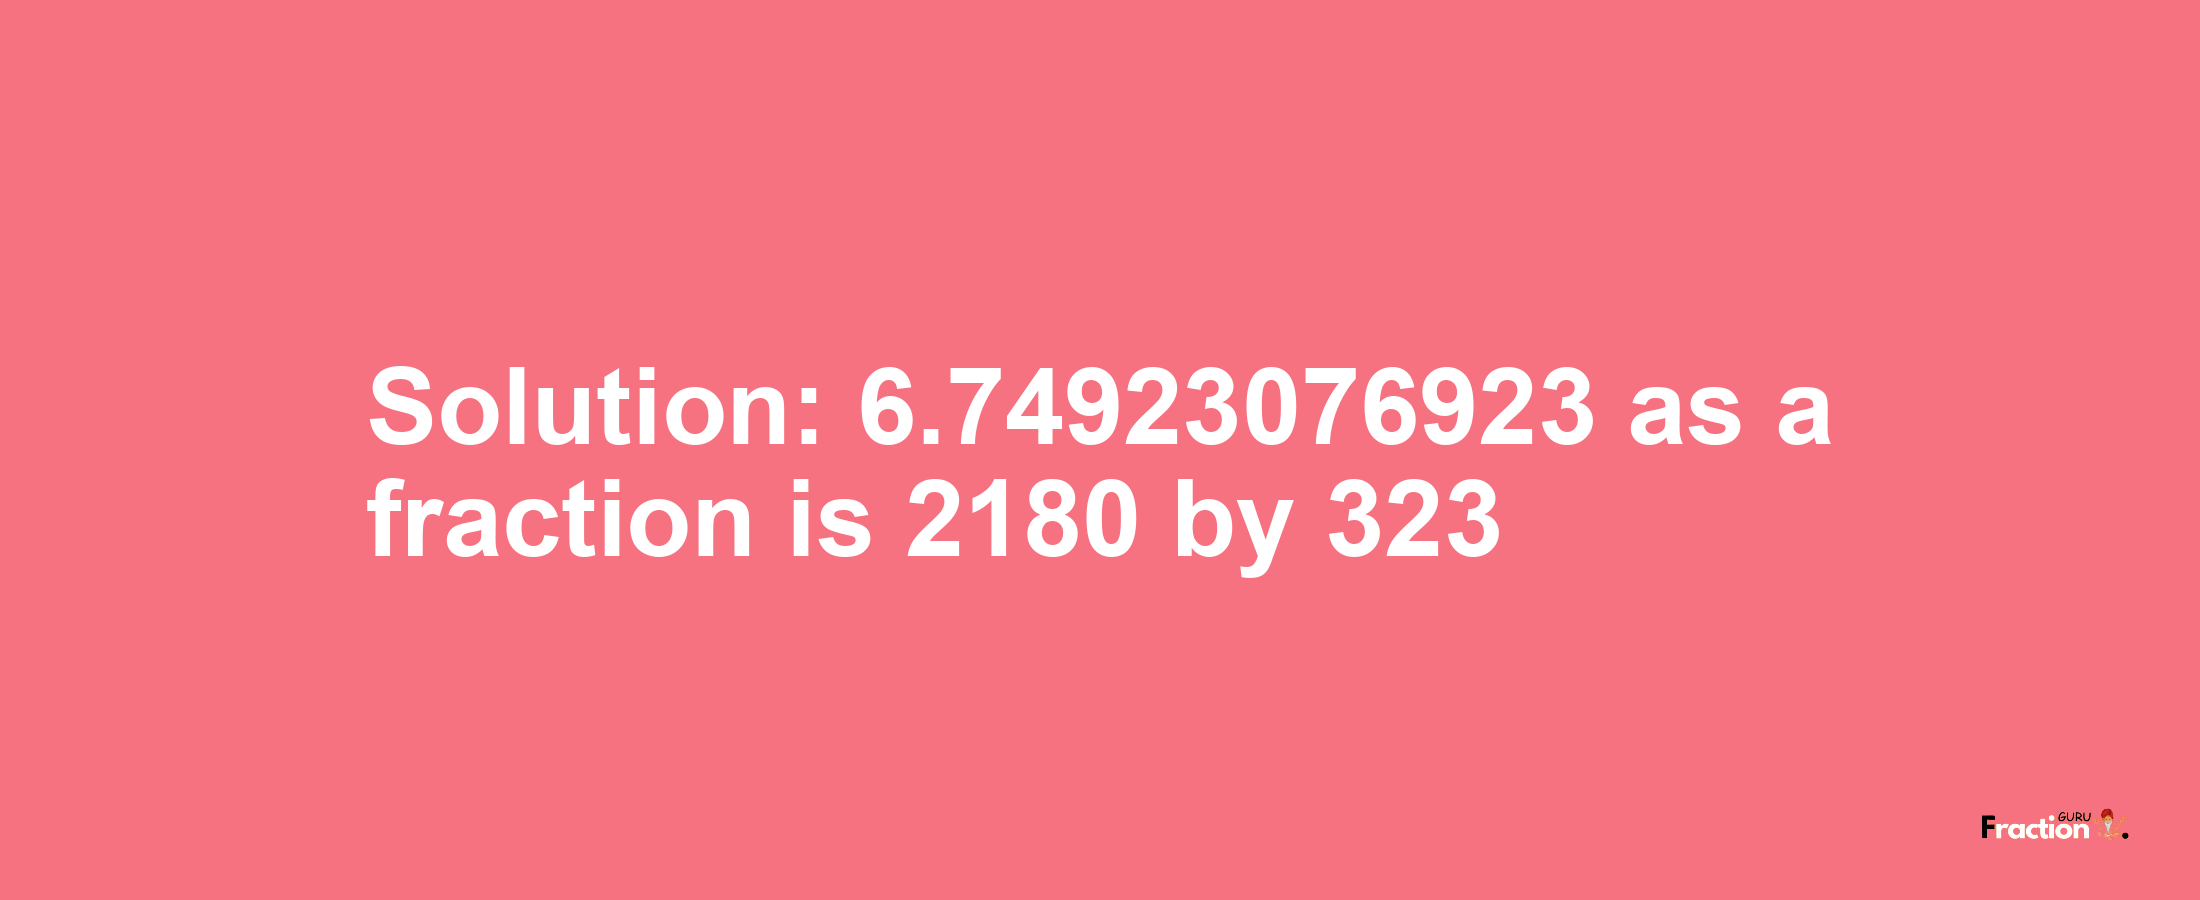 Solution:6.74923076923 as a fraction is 2180/323